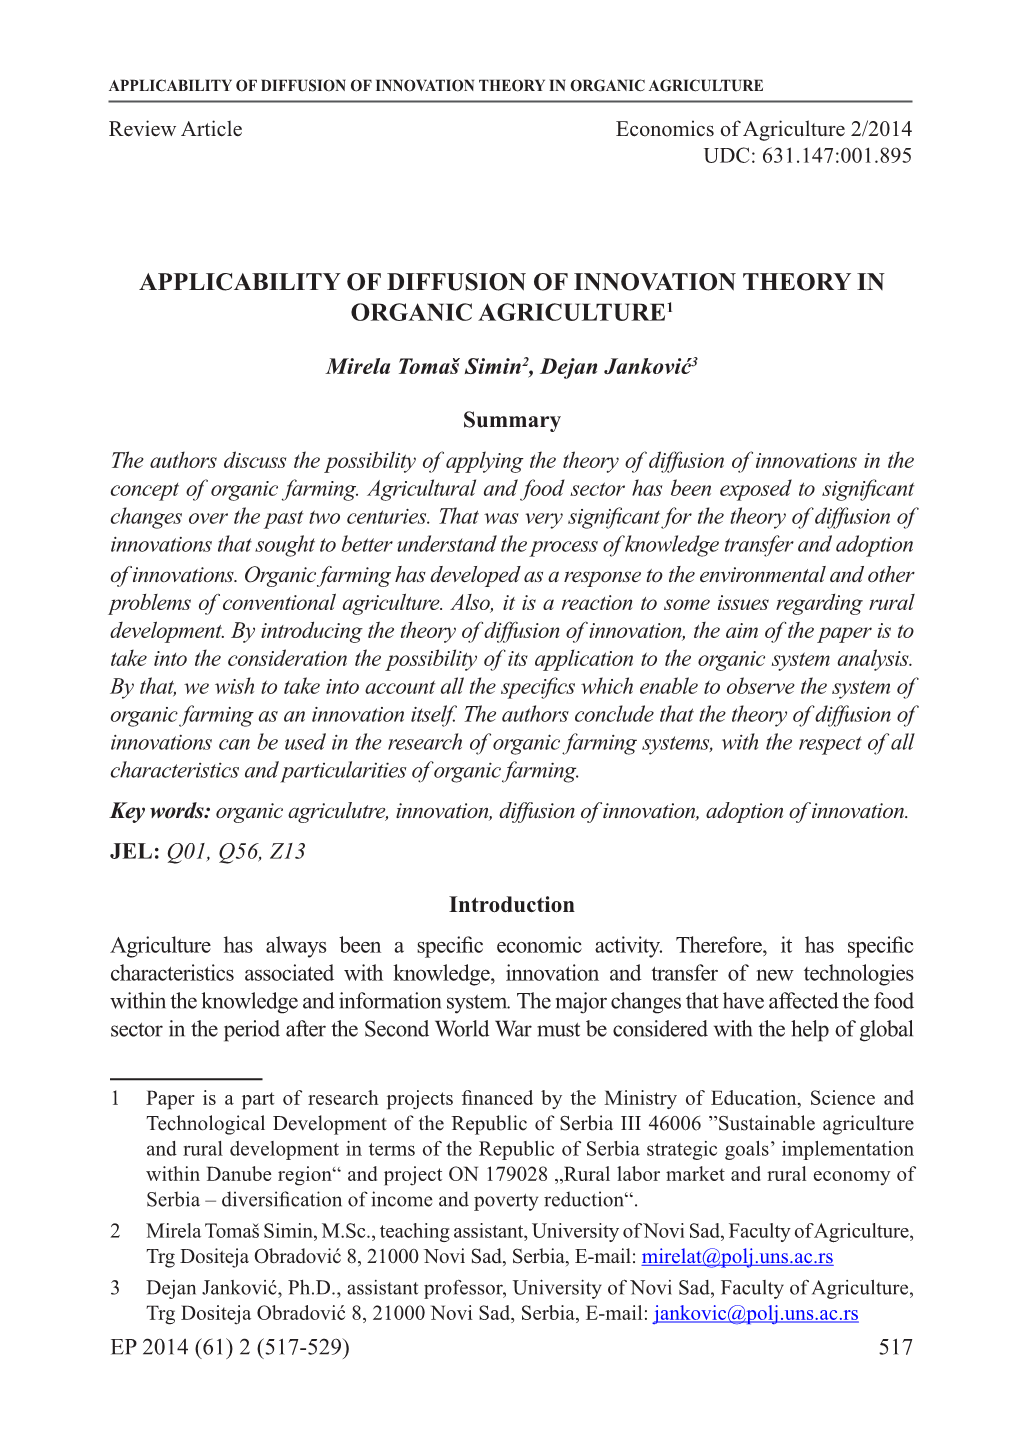 Applicability of Diffusion of Innovation Theory in Organic Agriculture1